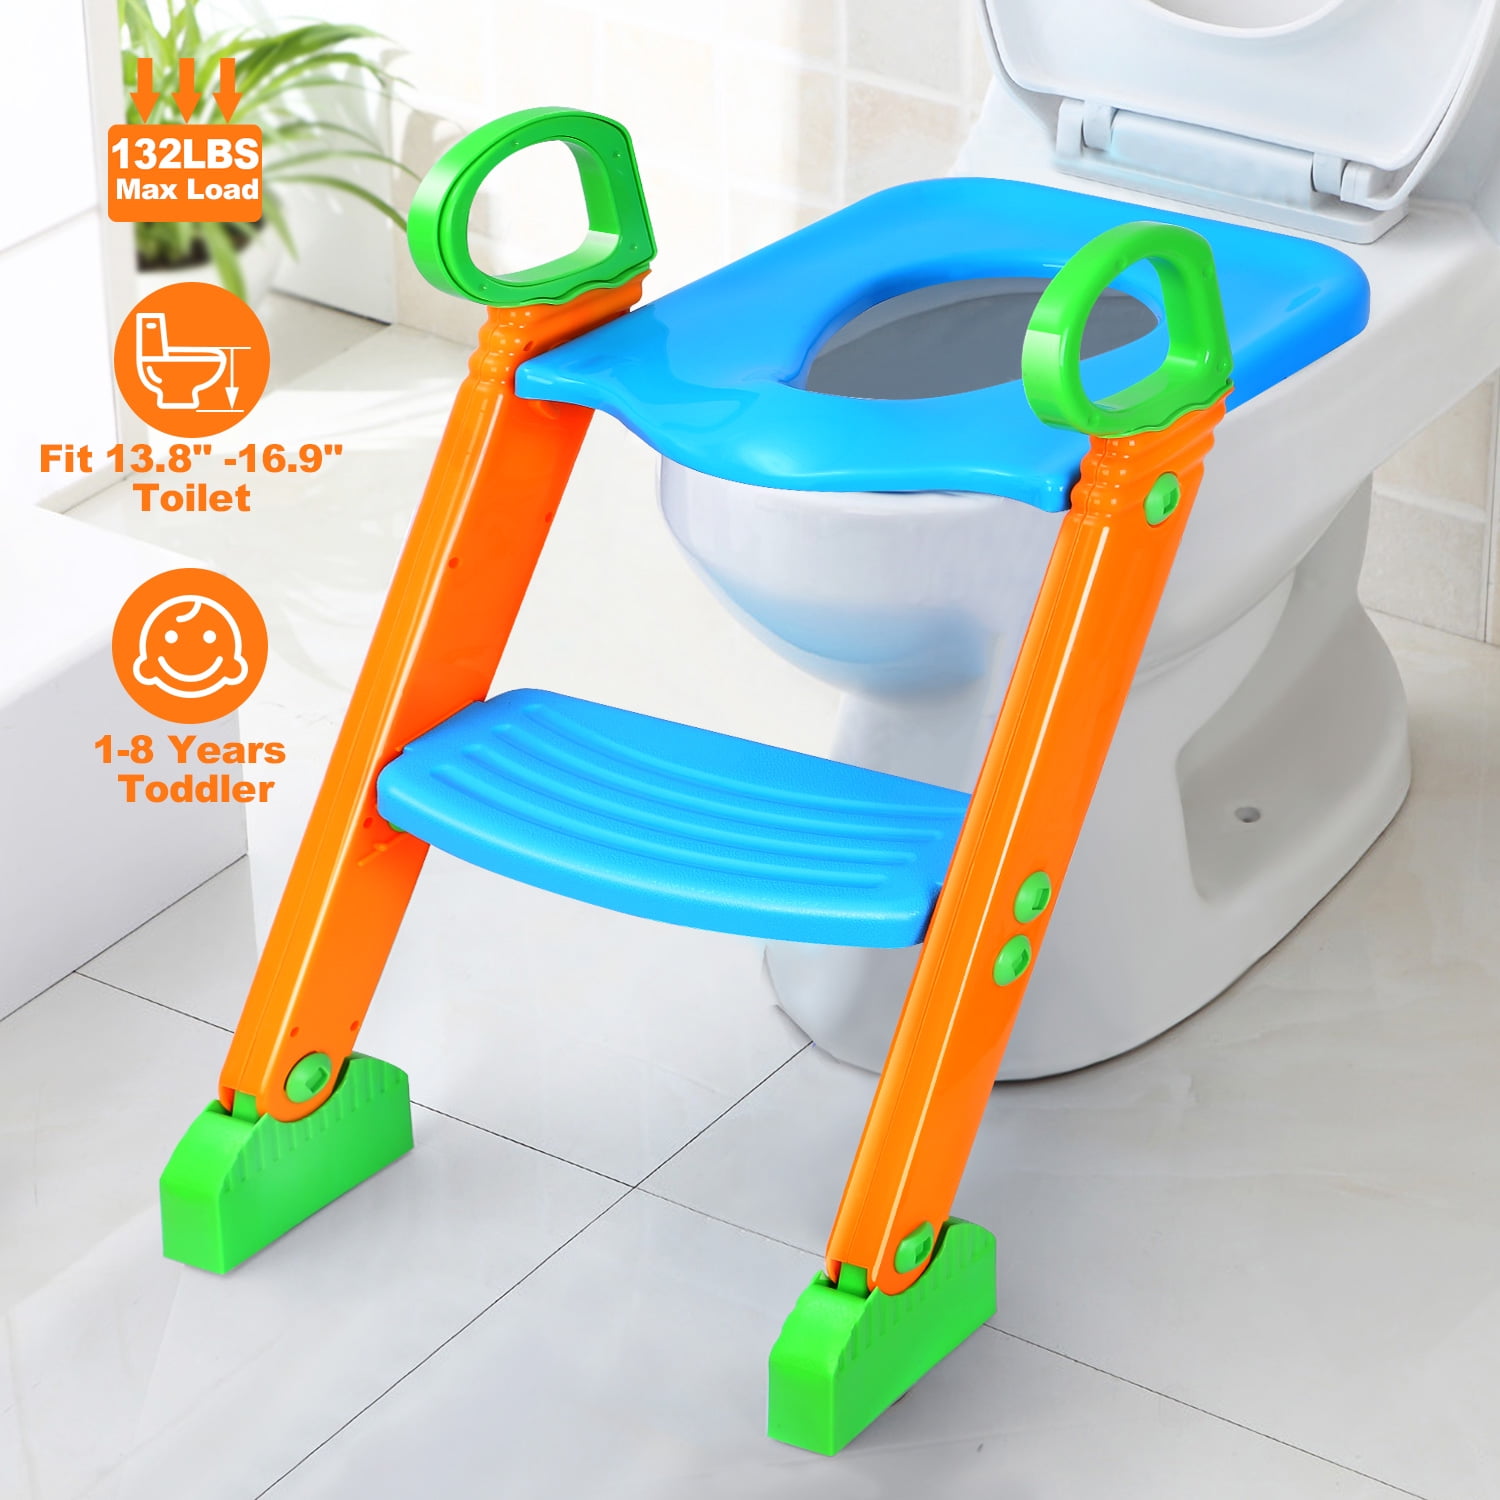 iMounTEK Potty Training Toilet Seat with Steps Stool Ladder For